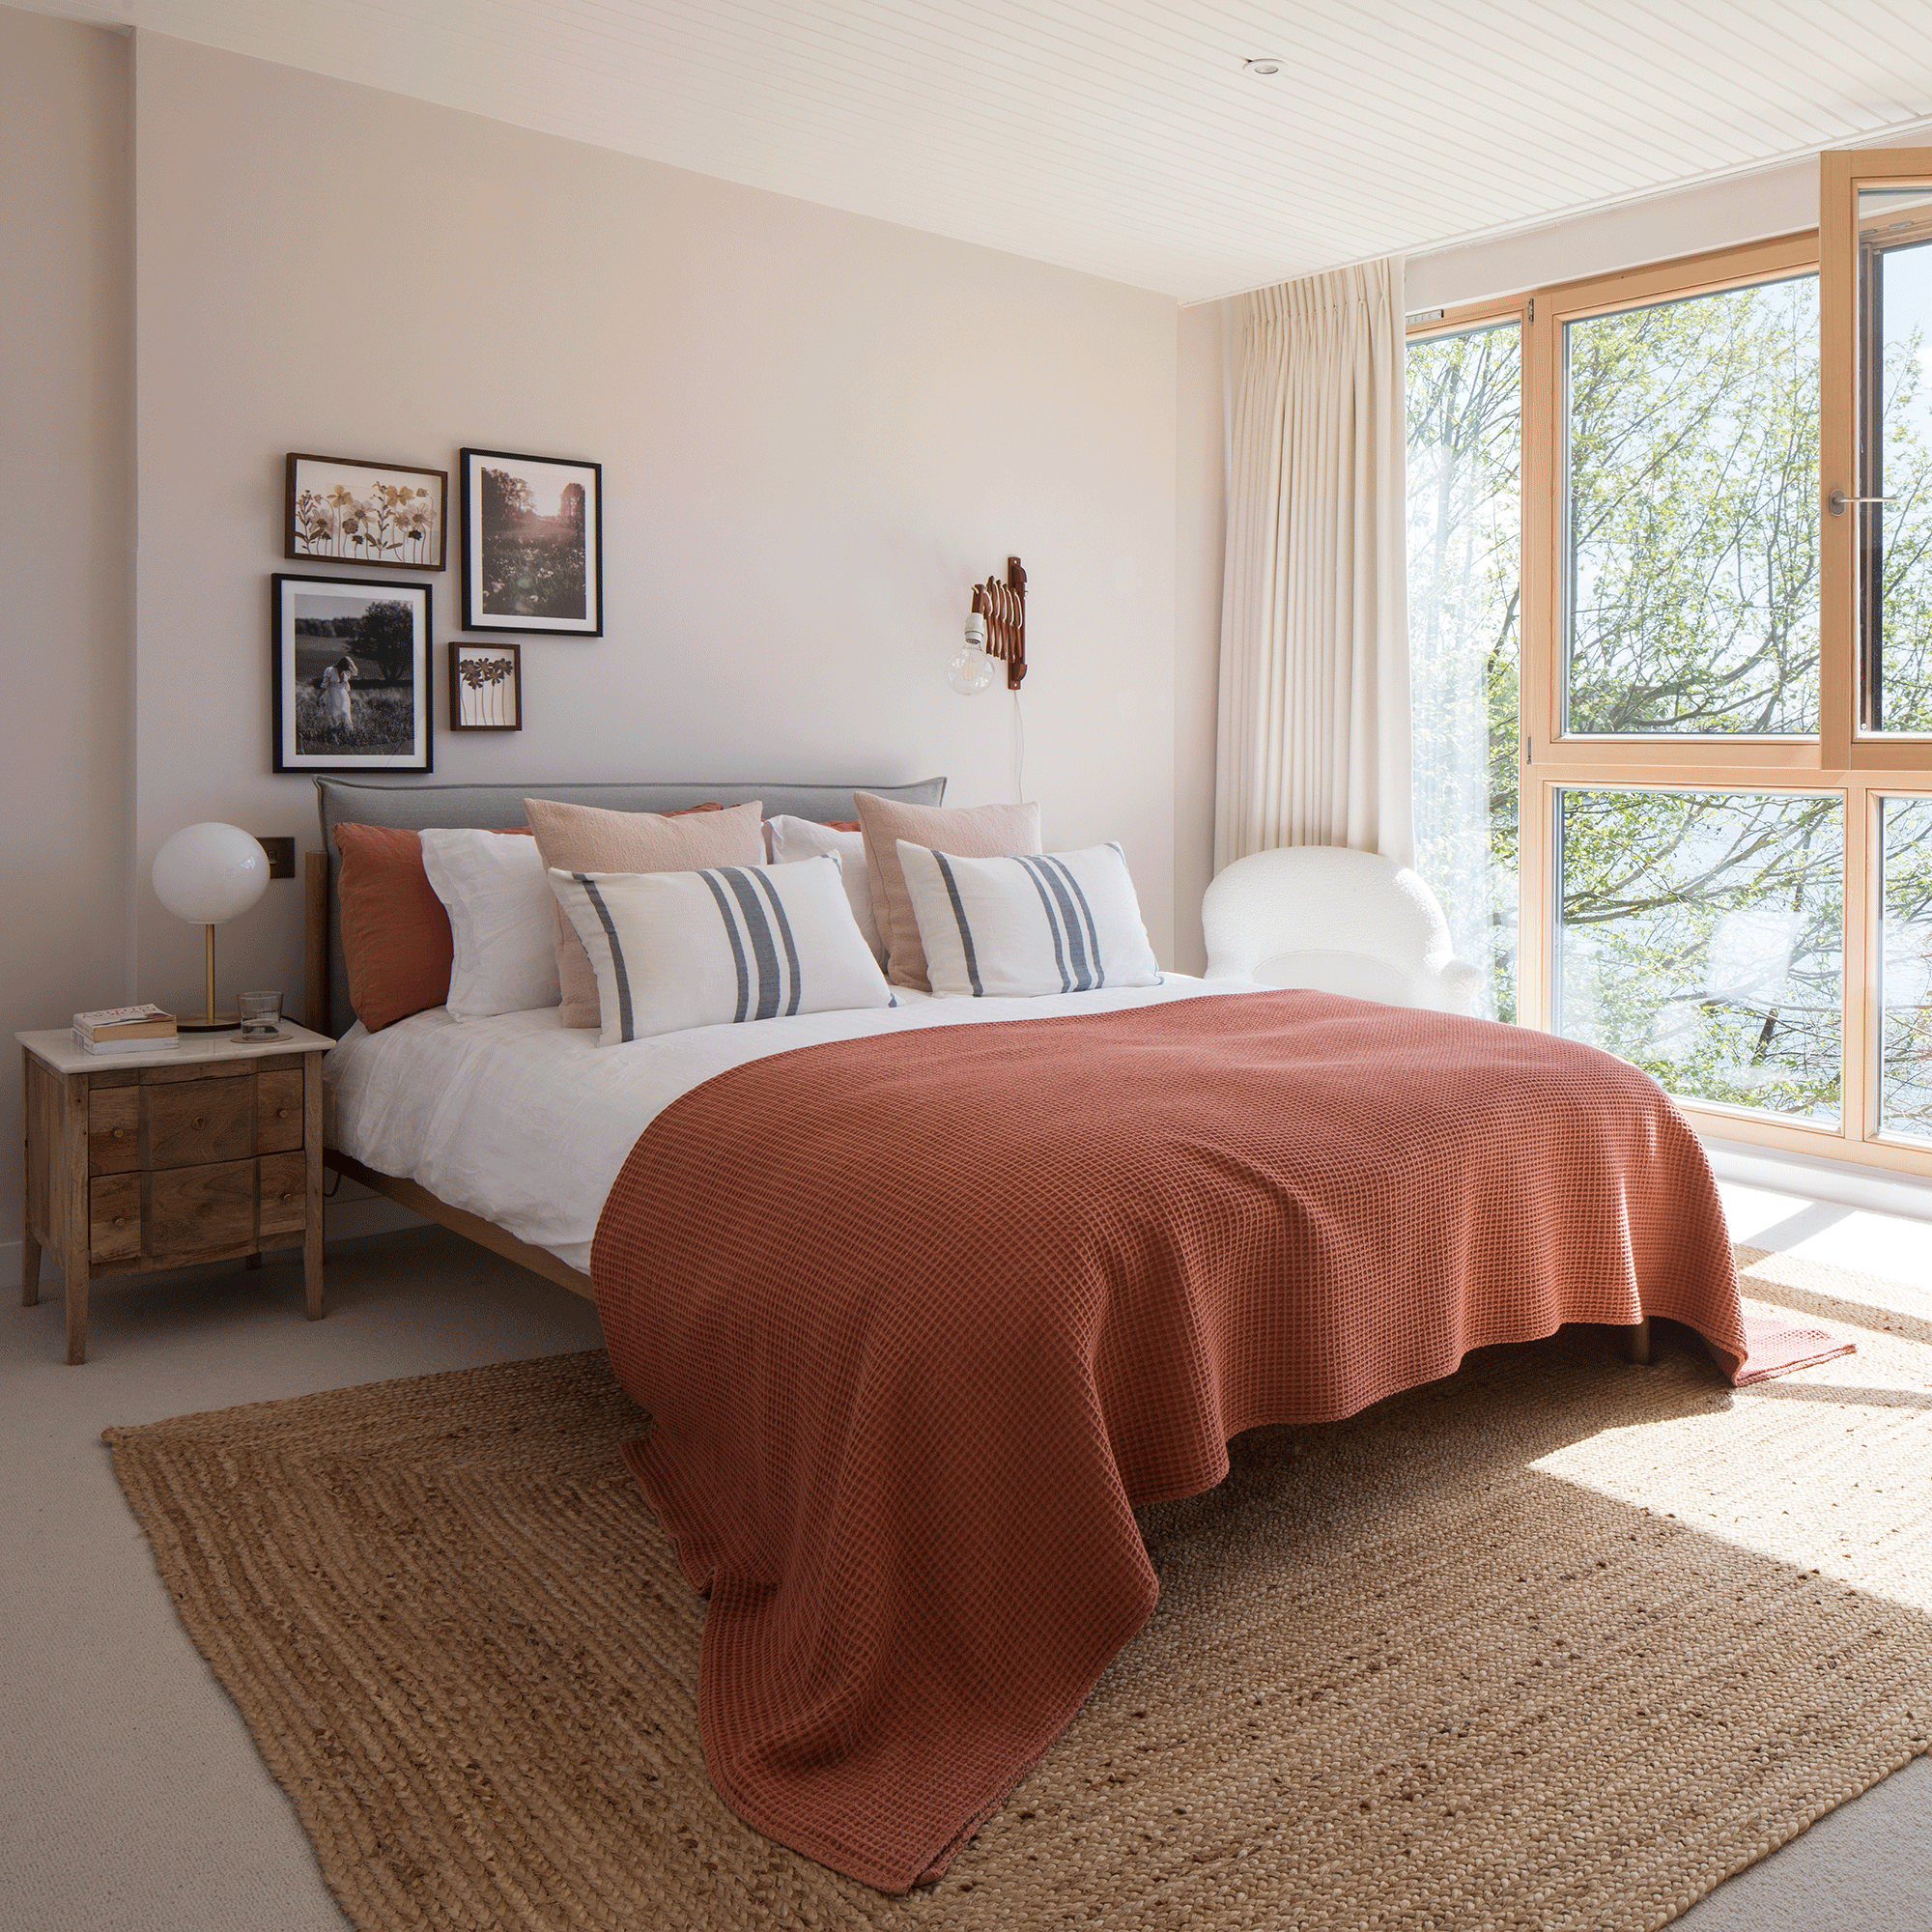 White bed with red throw on a natural rug